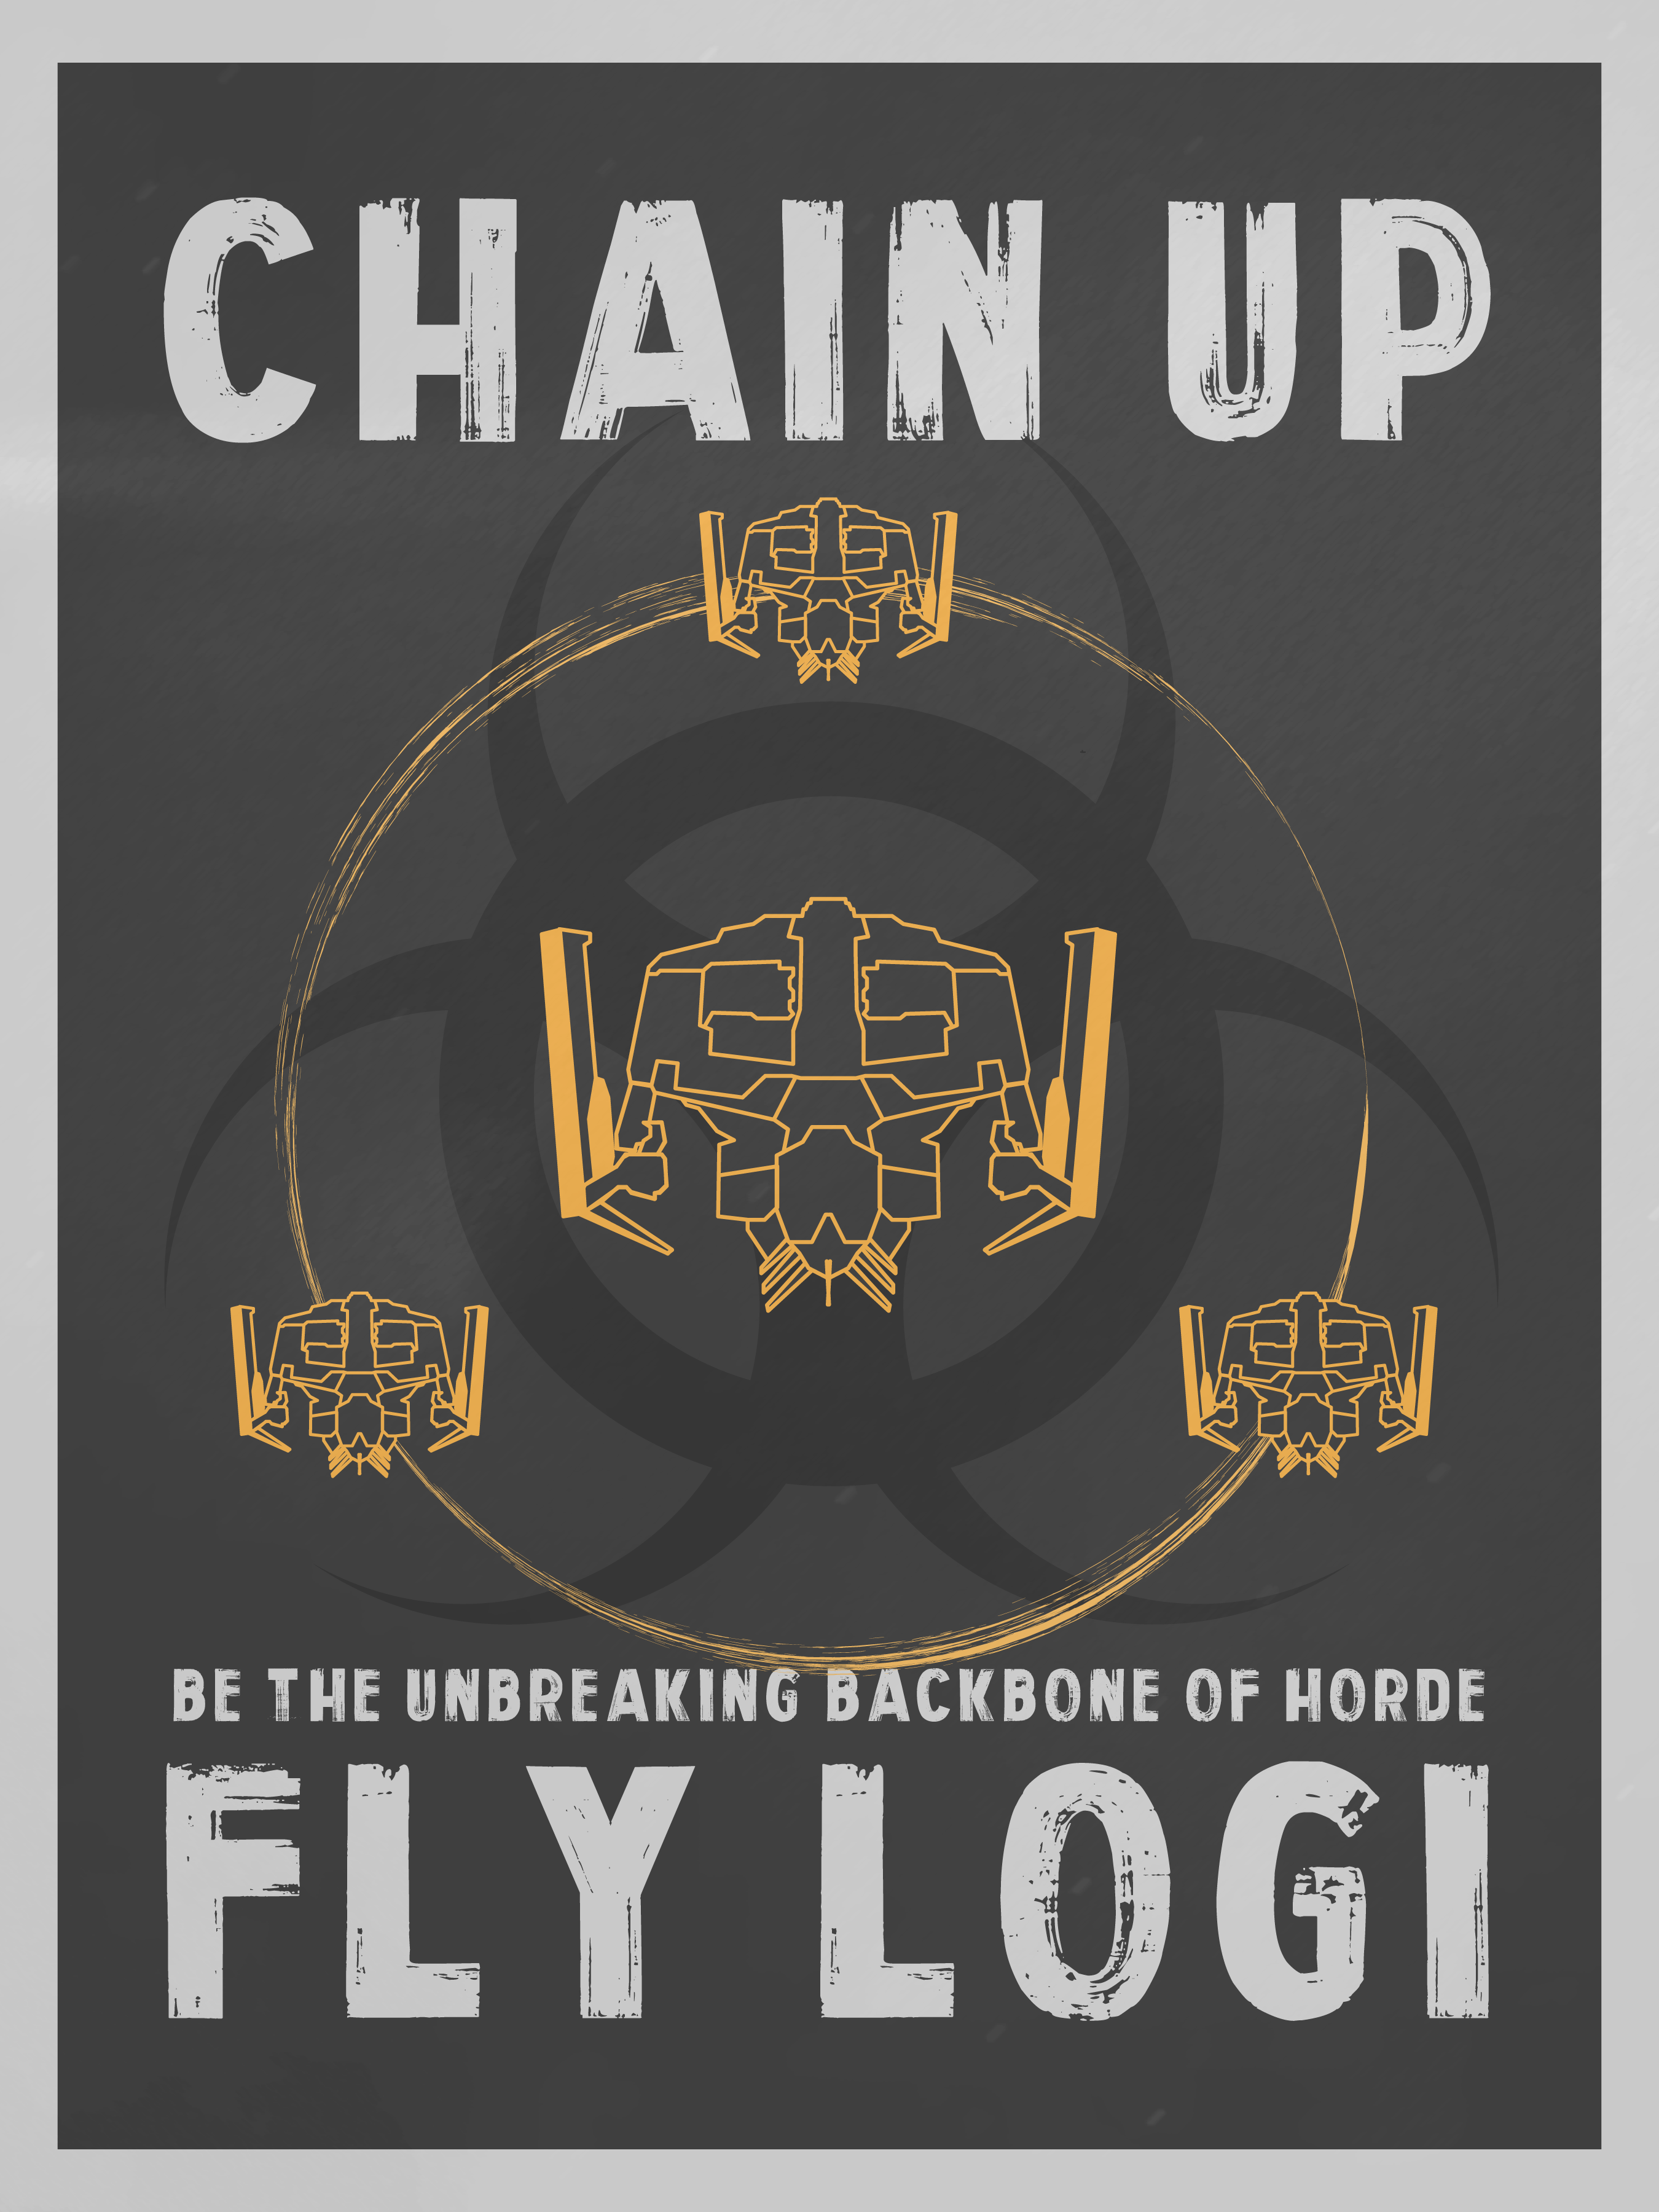 A random poster I threw together for practice. I used this to encourage our pilots to consider flying support in our fleets.